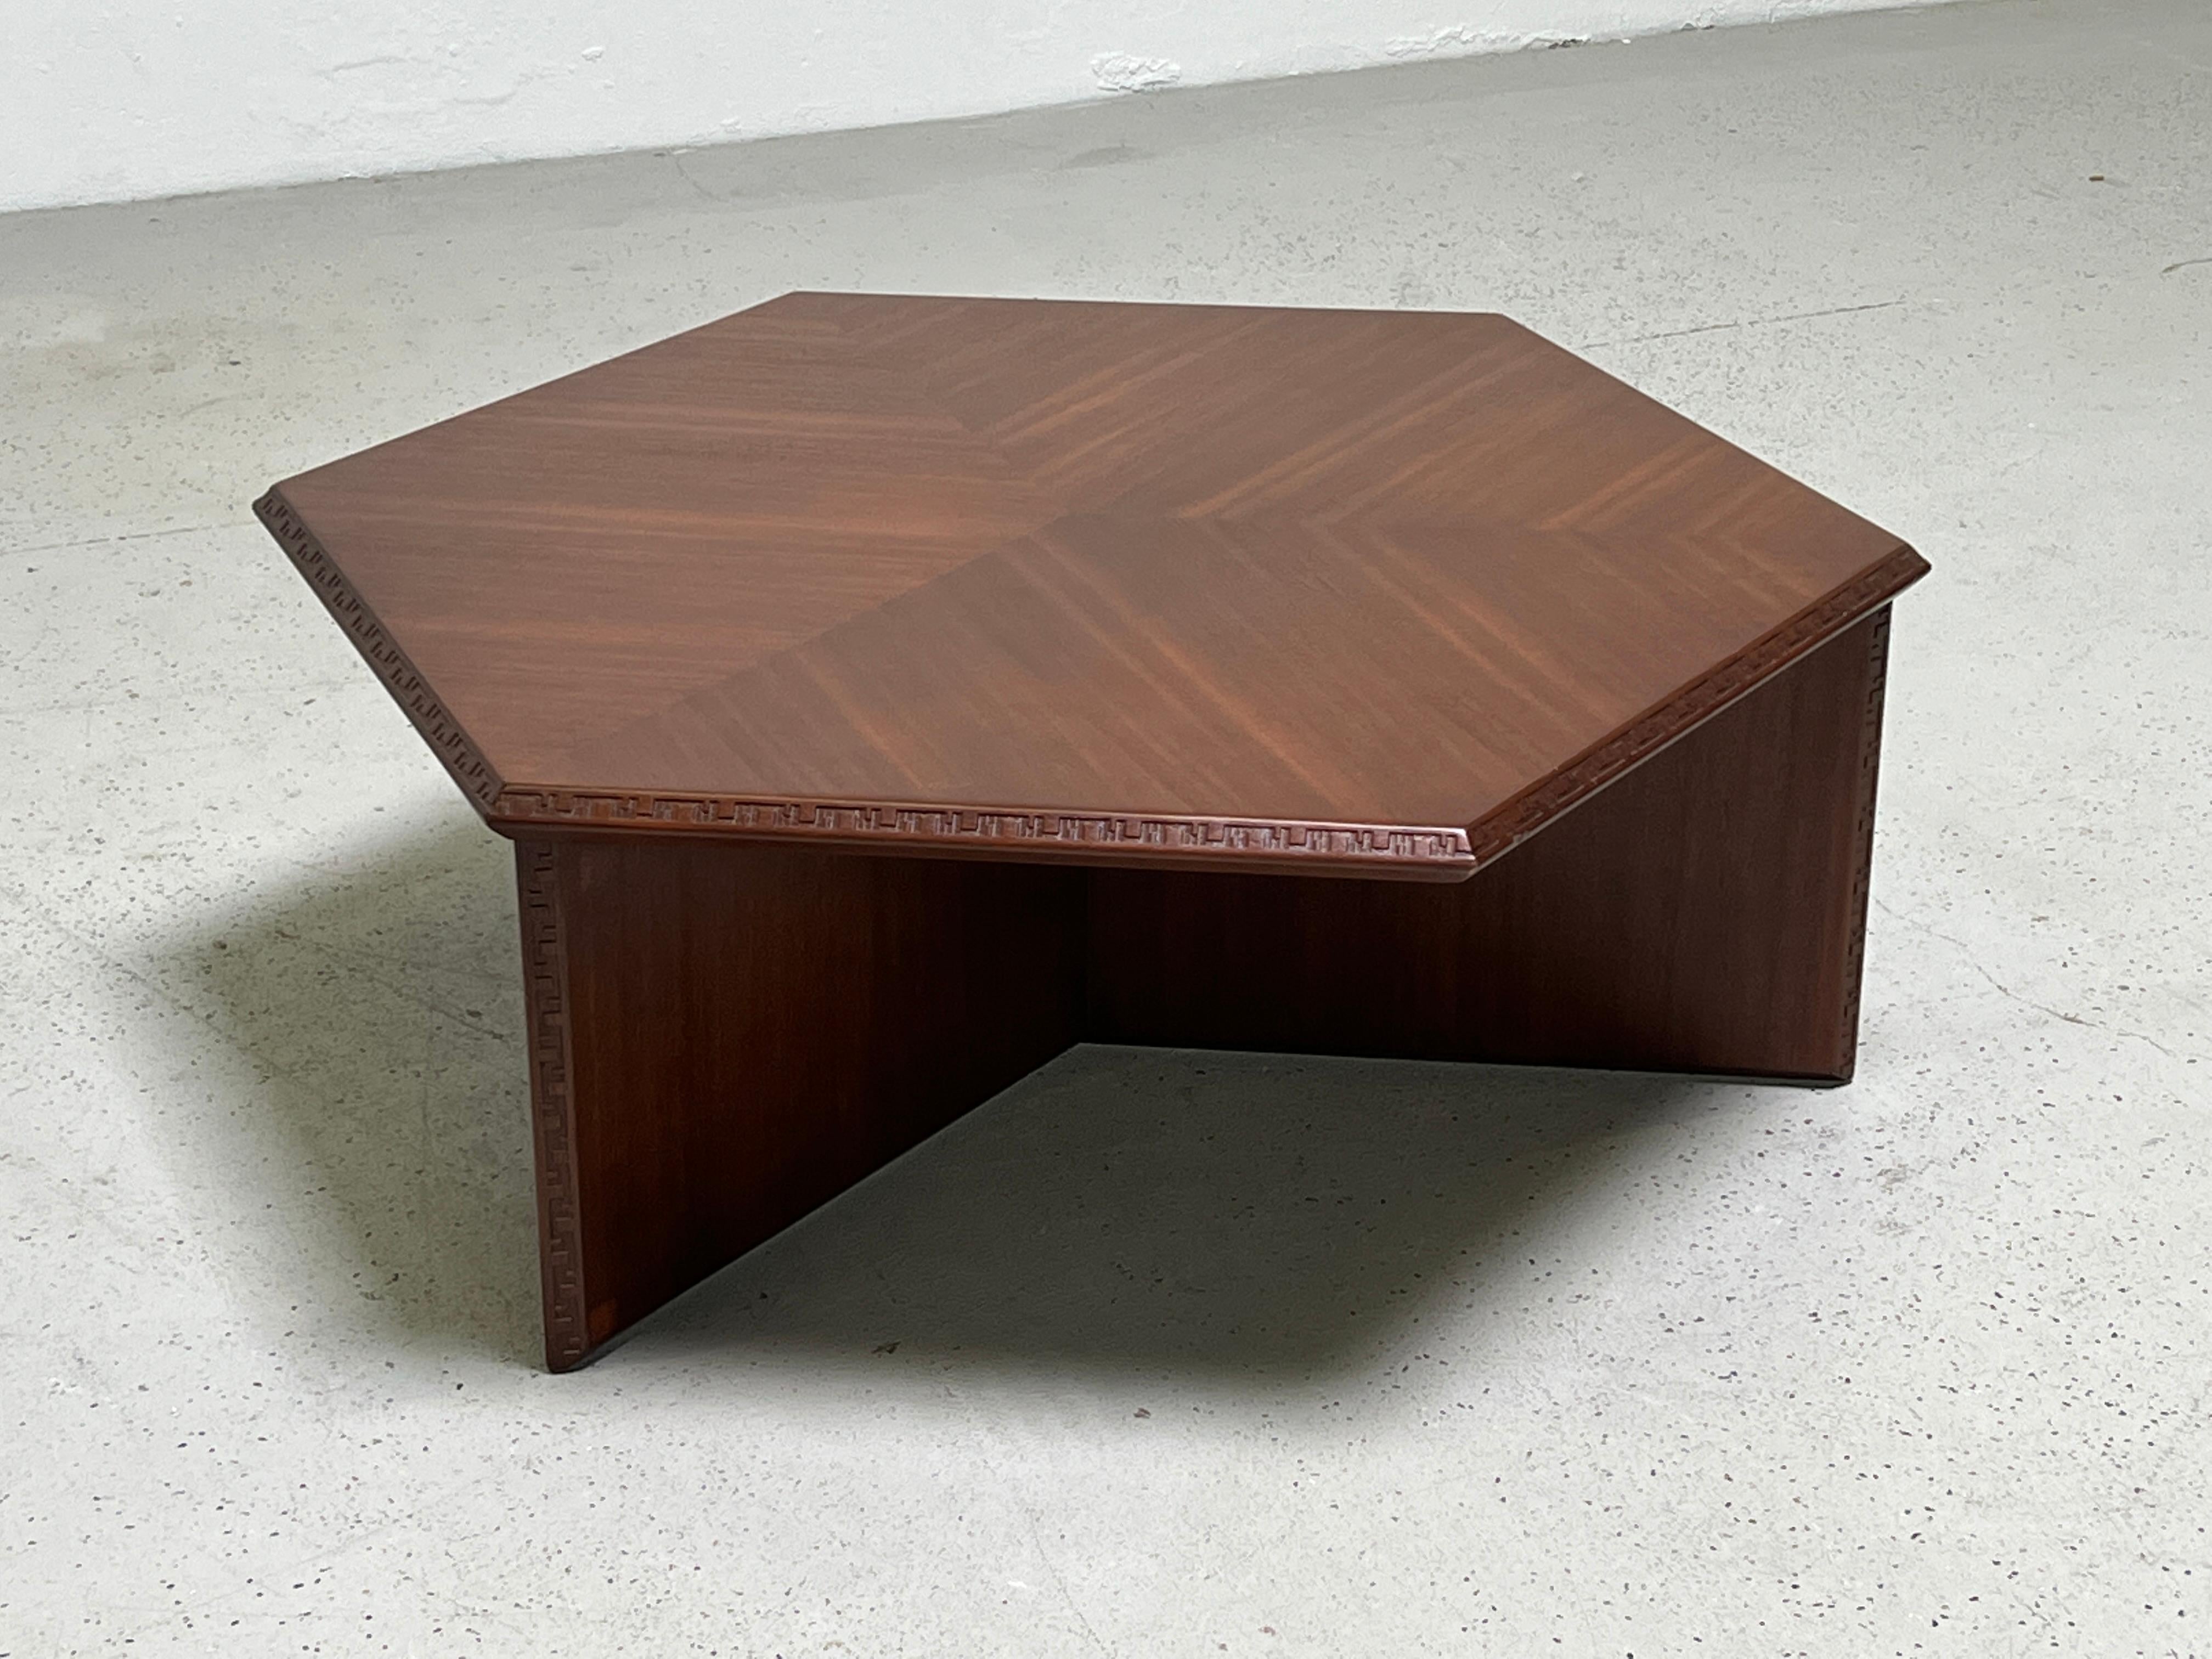 Hexagonal Taliesin Coffee Table by Frank Lloyd Wright for Henredon In Good Condition For Sale In Dallas, TX